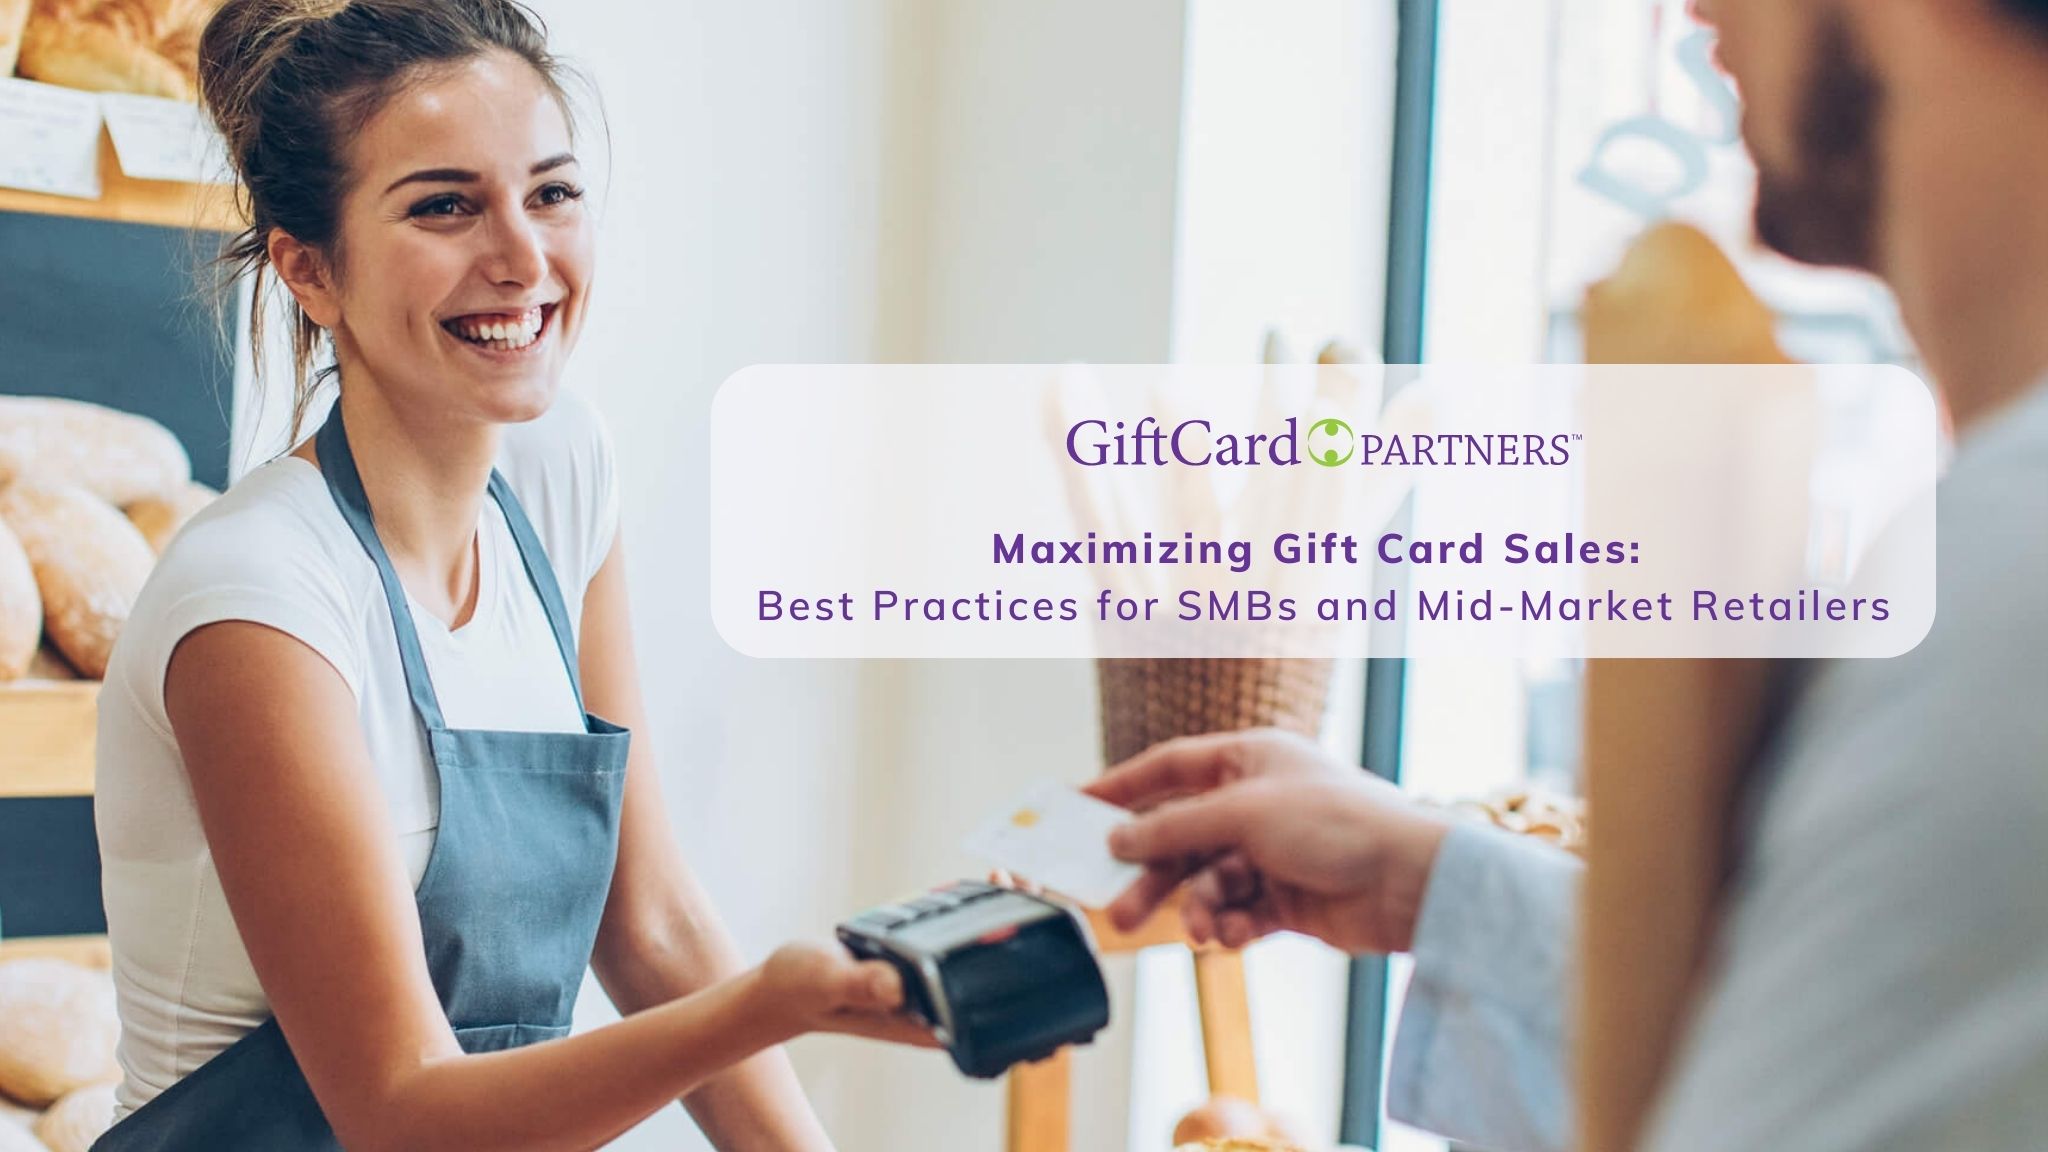 Gift Card Marketing for SMBs and Mid-Market Retailers